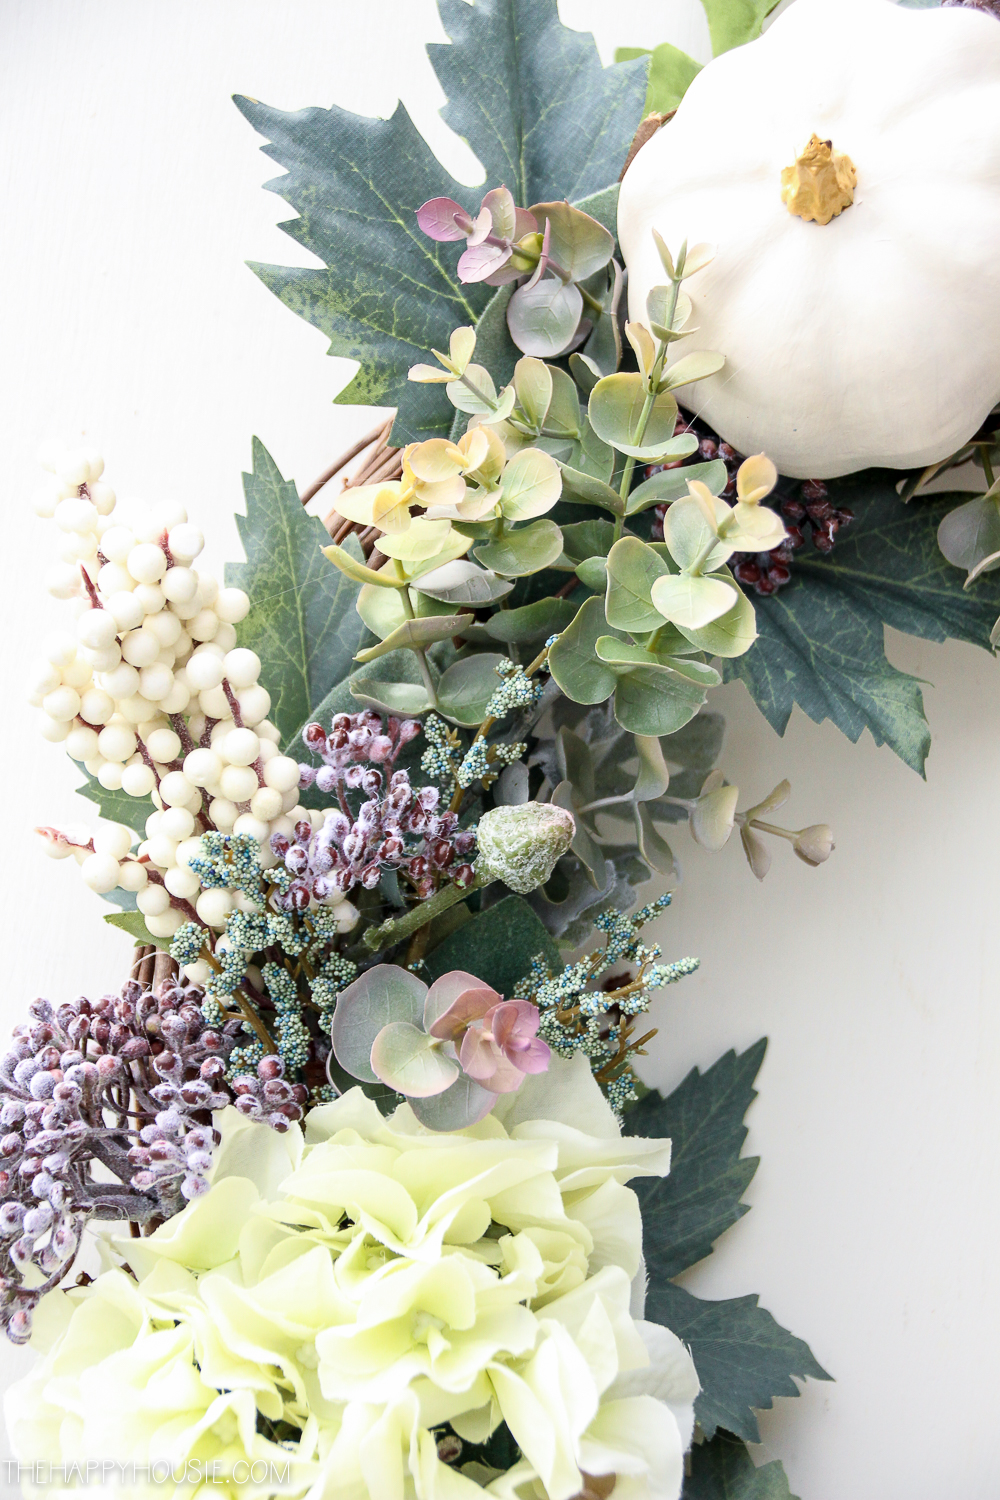 Up close of the the berry, eucalyptus and leaves on the wreath.